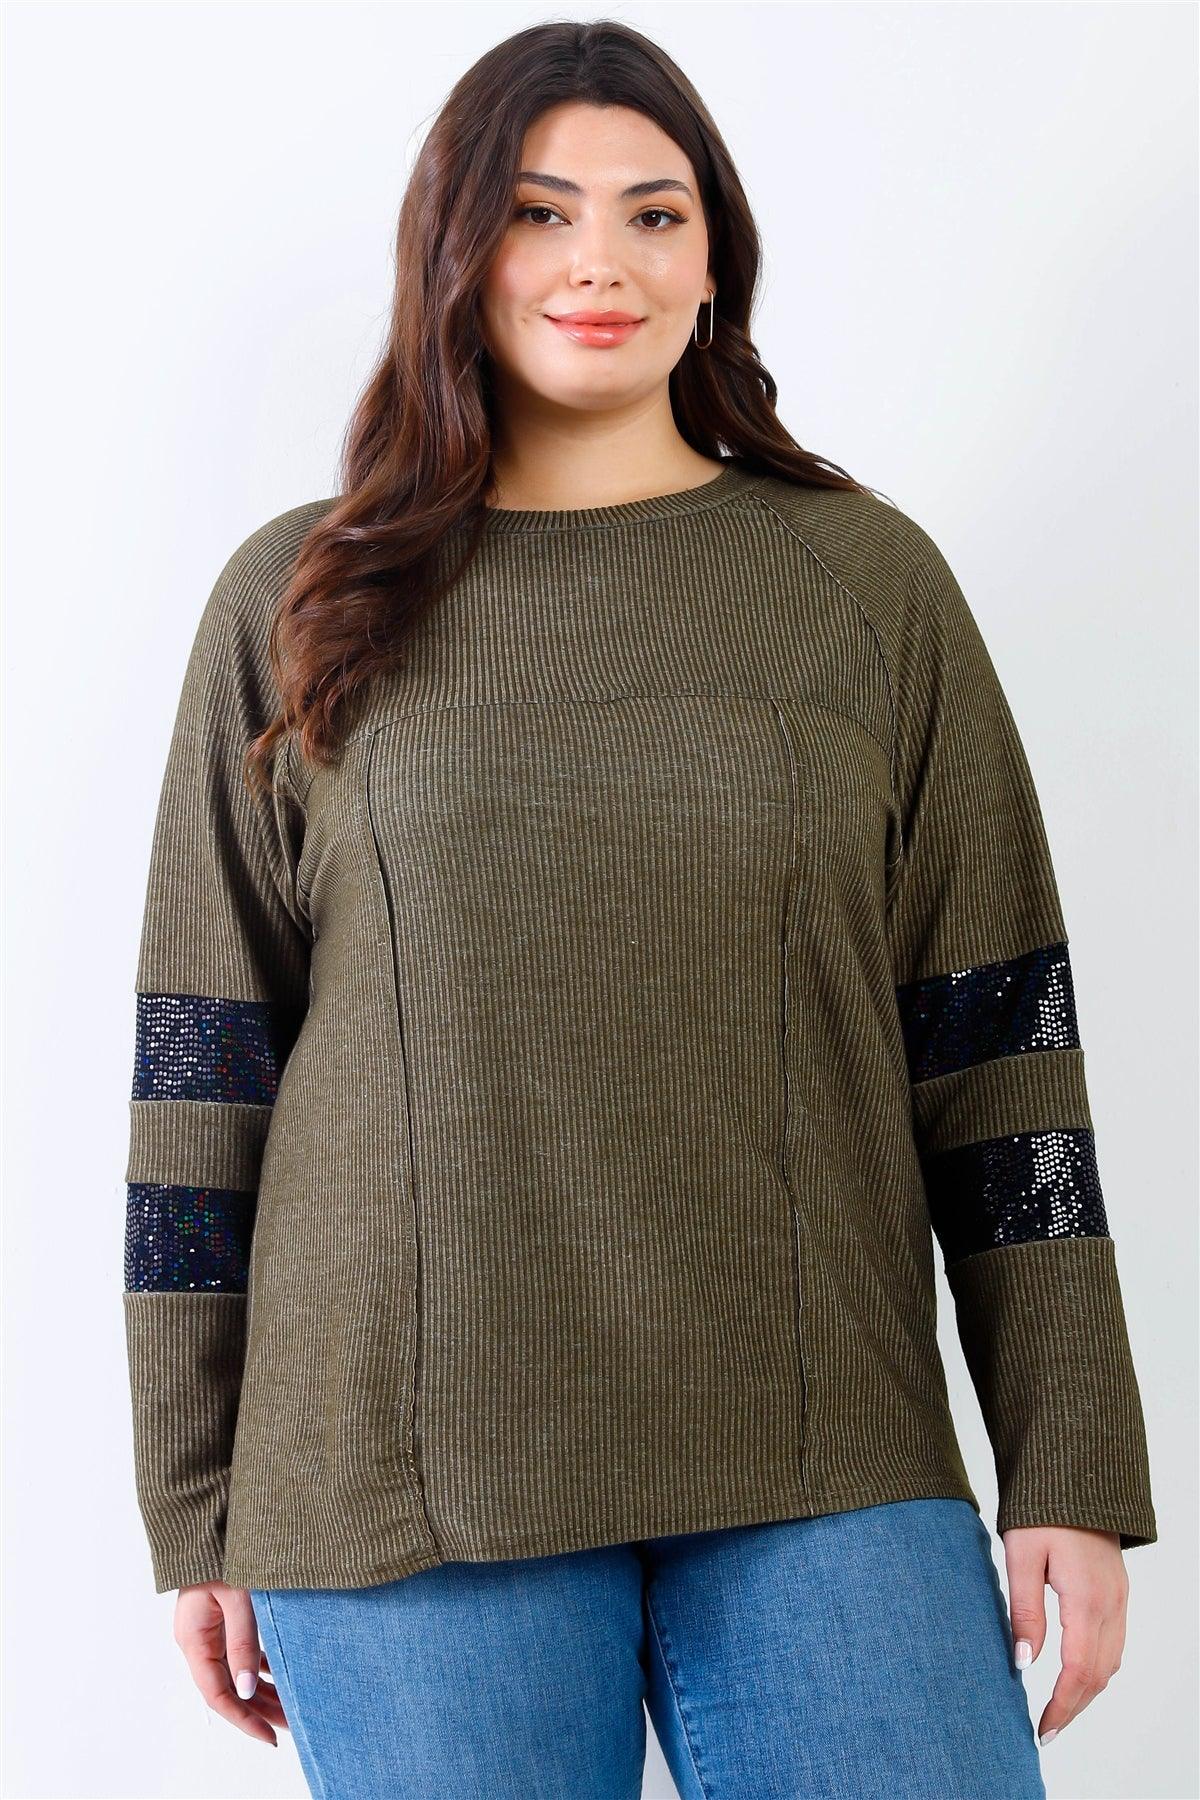 Junior Plus Olive Ribbed Sequin Detail Long Sleeve Top /2-2-2